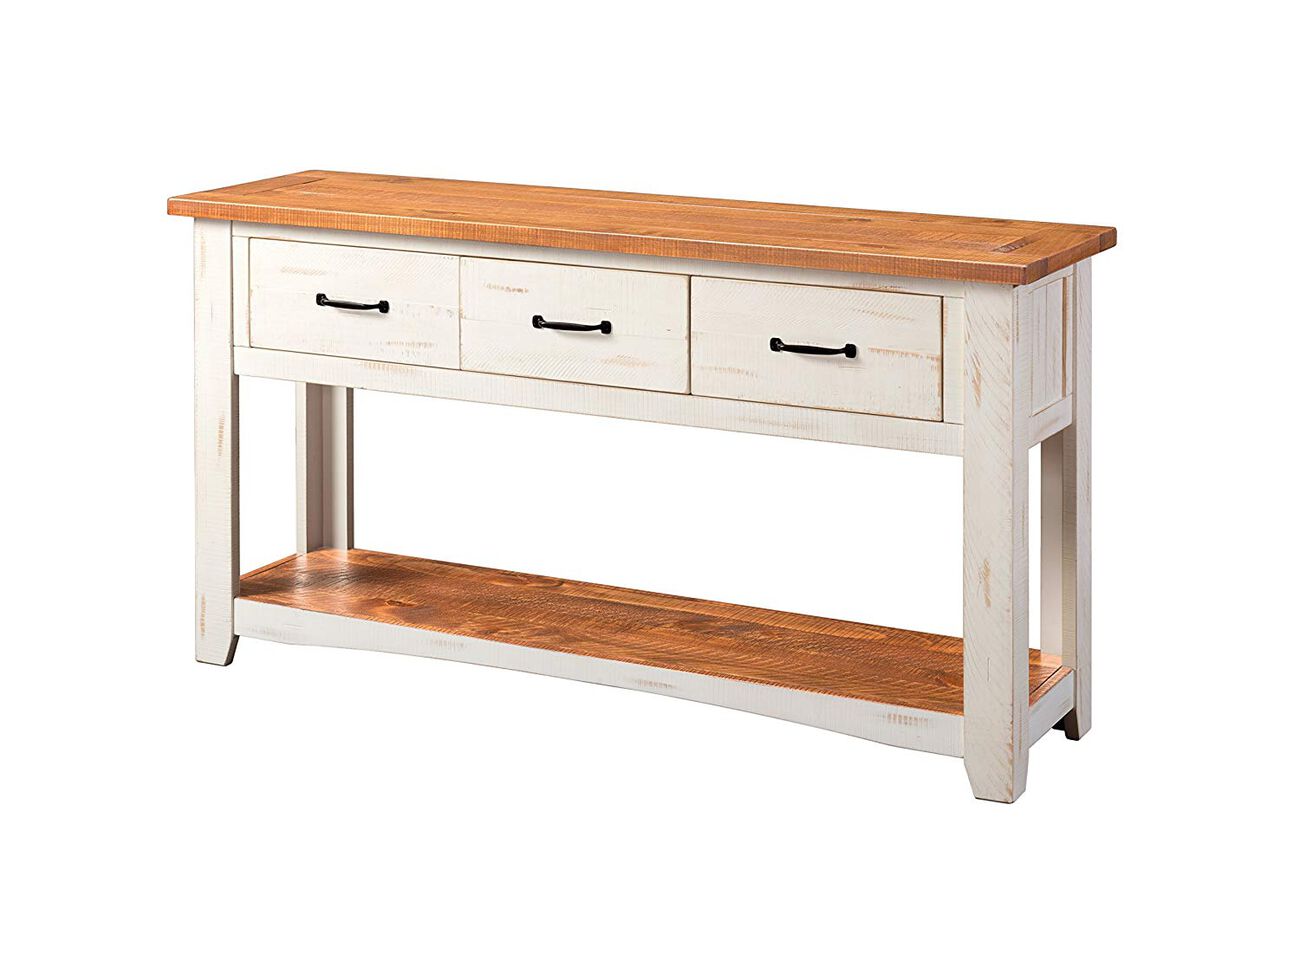 Dual Tone Wooden Console Table With Three Drawers, White and Brown